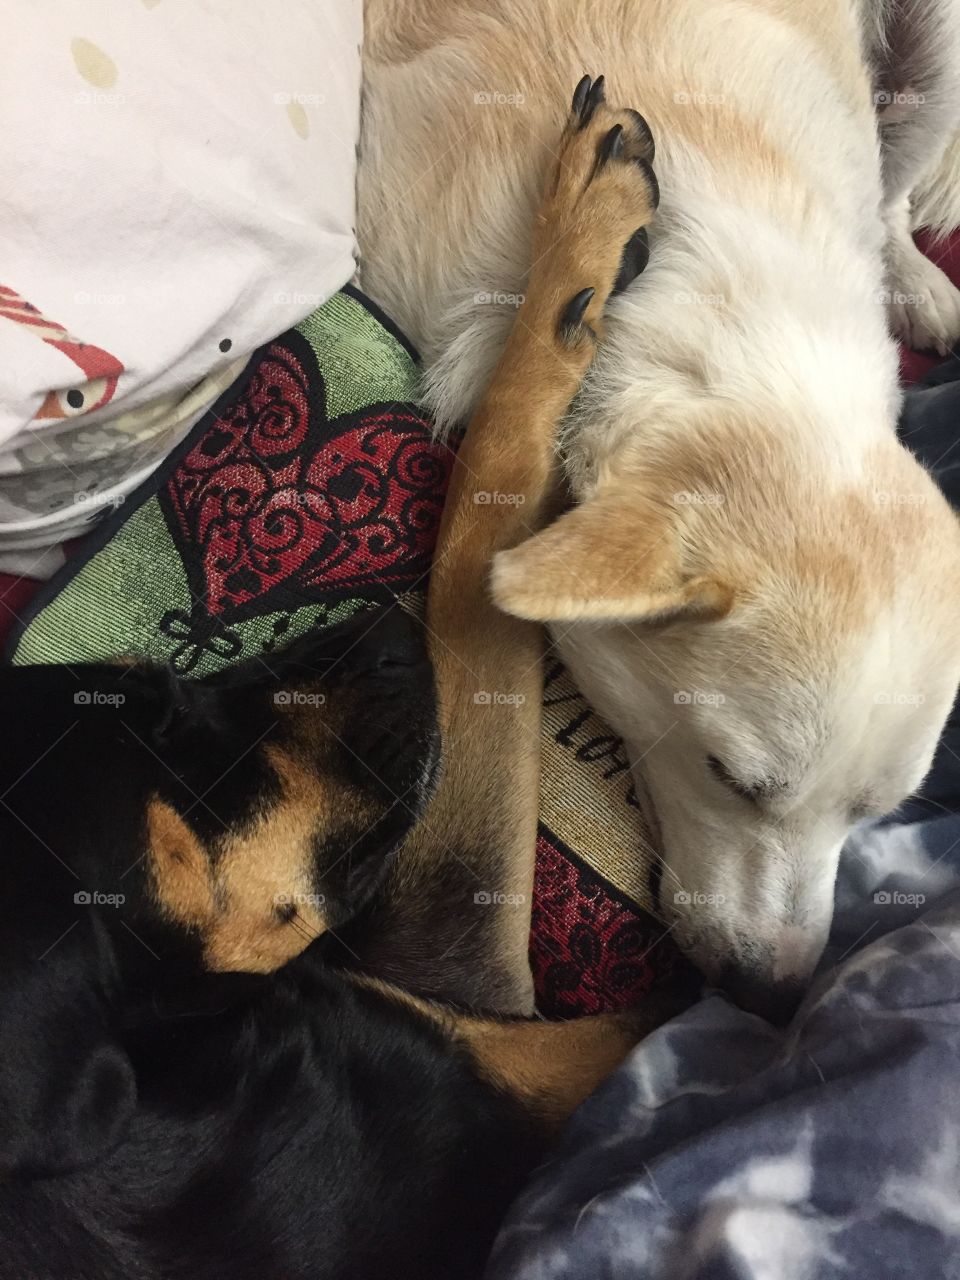 Sleeping Best Friends Black Dog and White Dog from Animal Rescue sharing Love